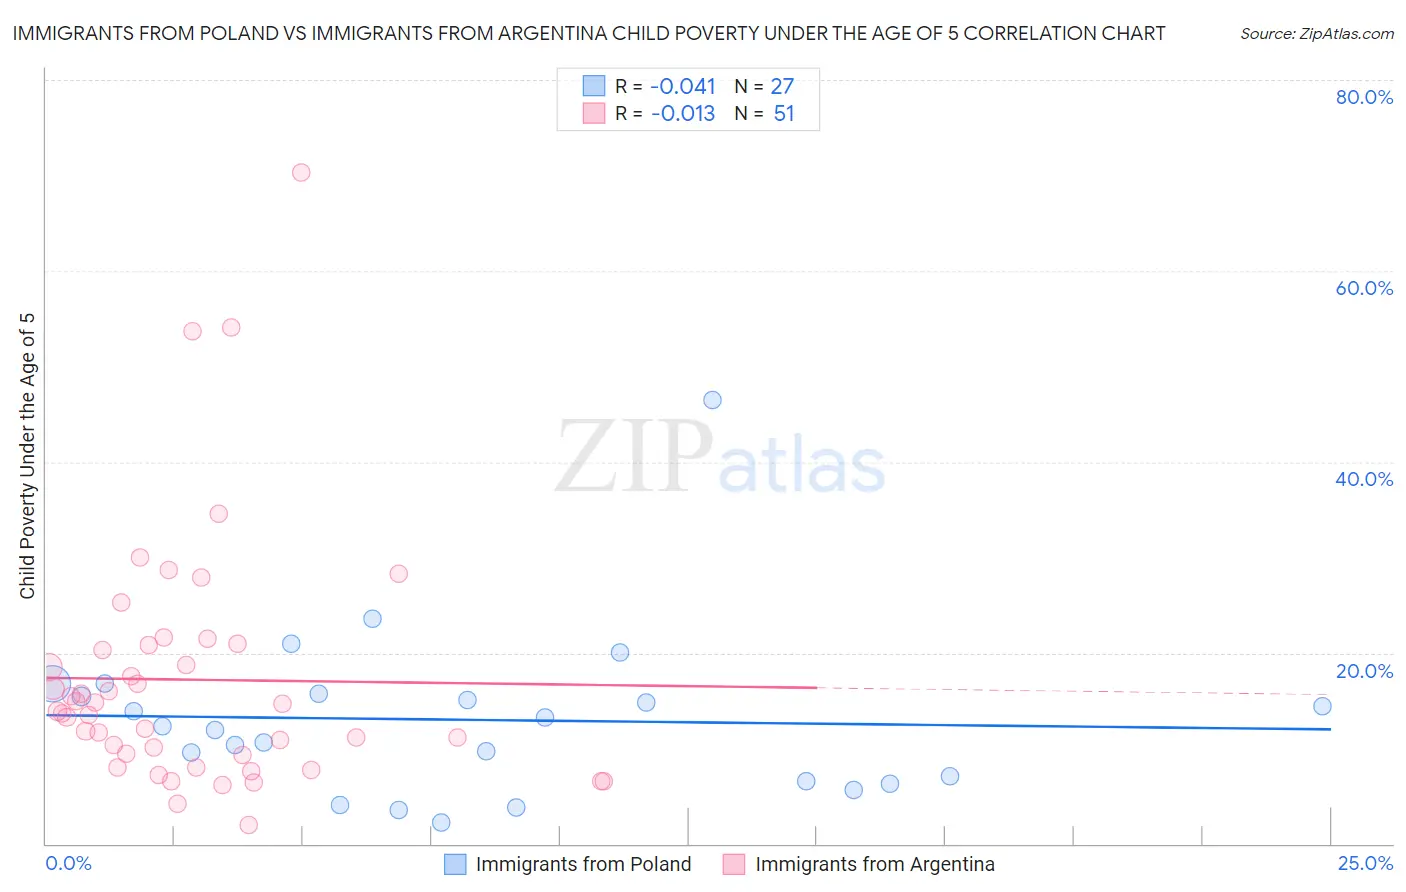 Immigrants from Poland vs Immigrants from Argentina Child Poverty Under the Age of 5